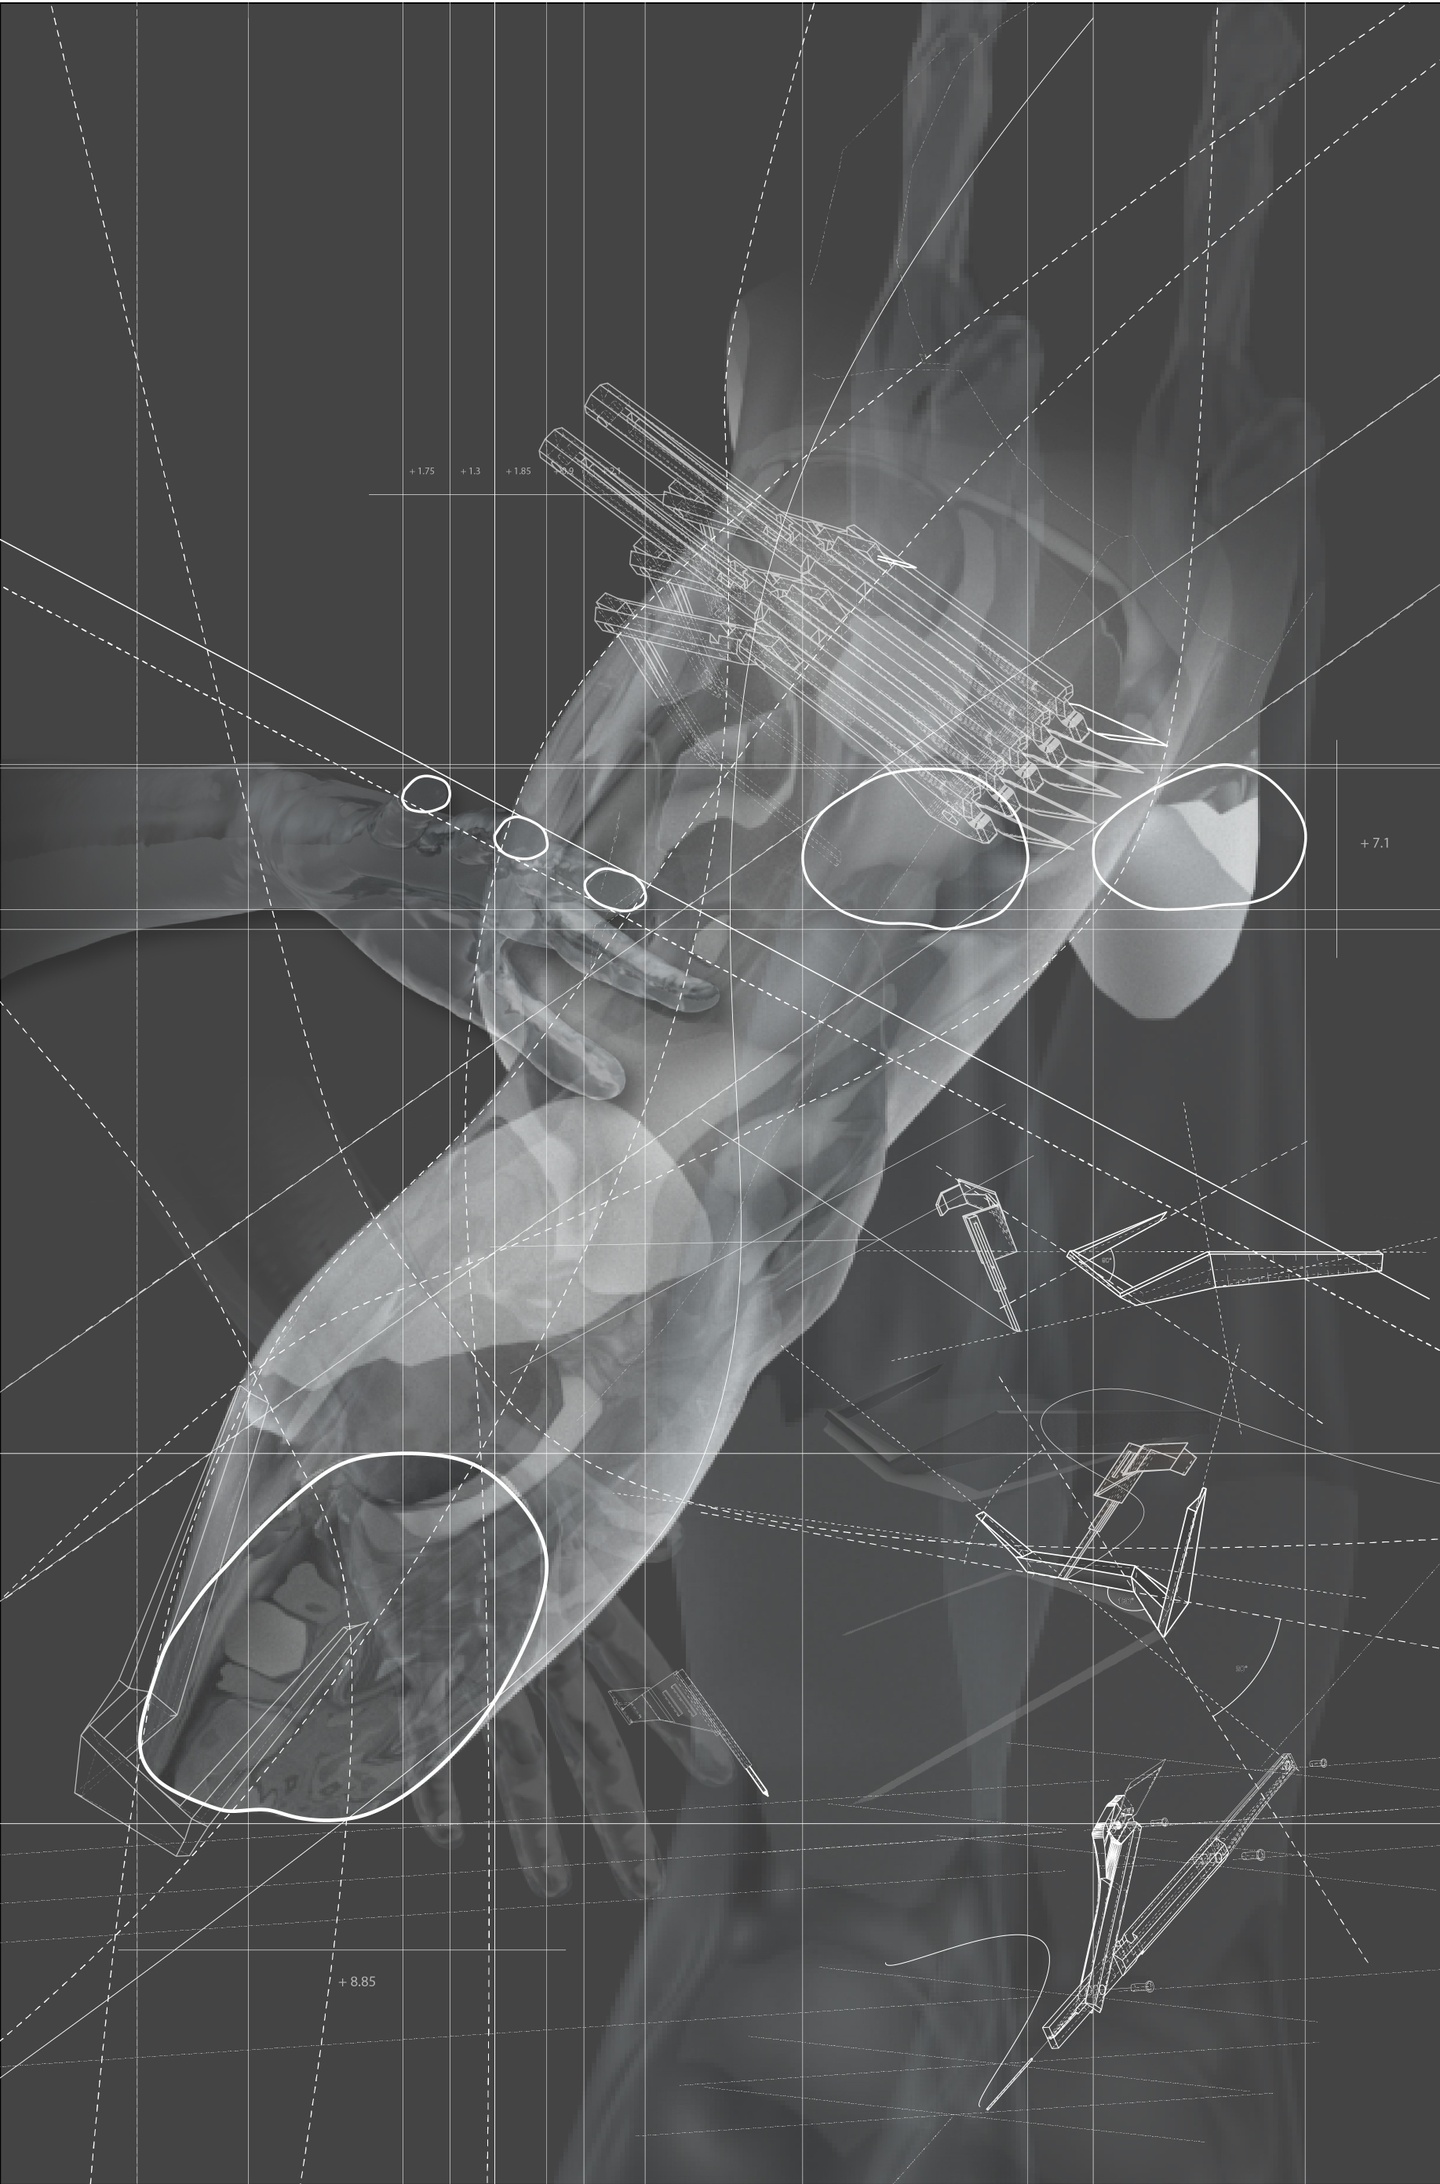 White on grey background digital drawing resembling x-rays with various organic shapes with outlined mechanical shapes